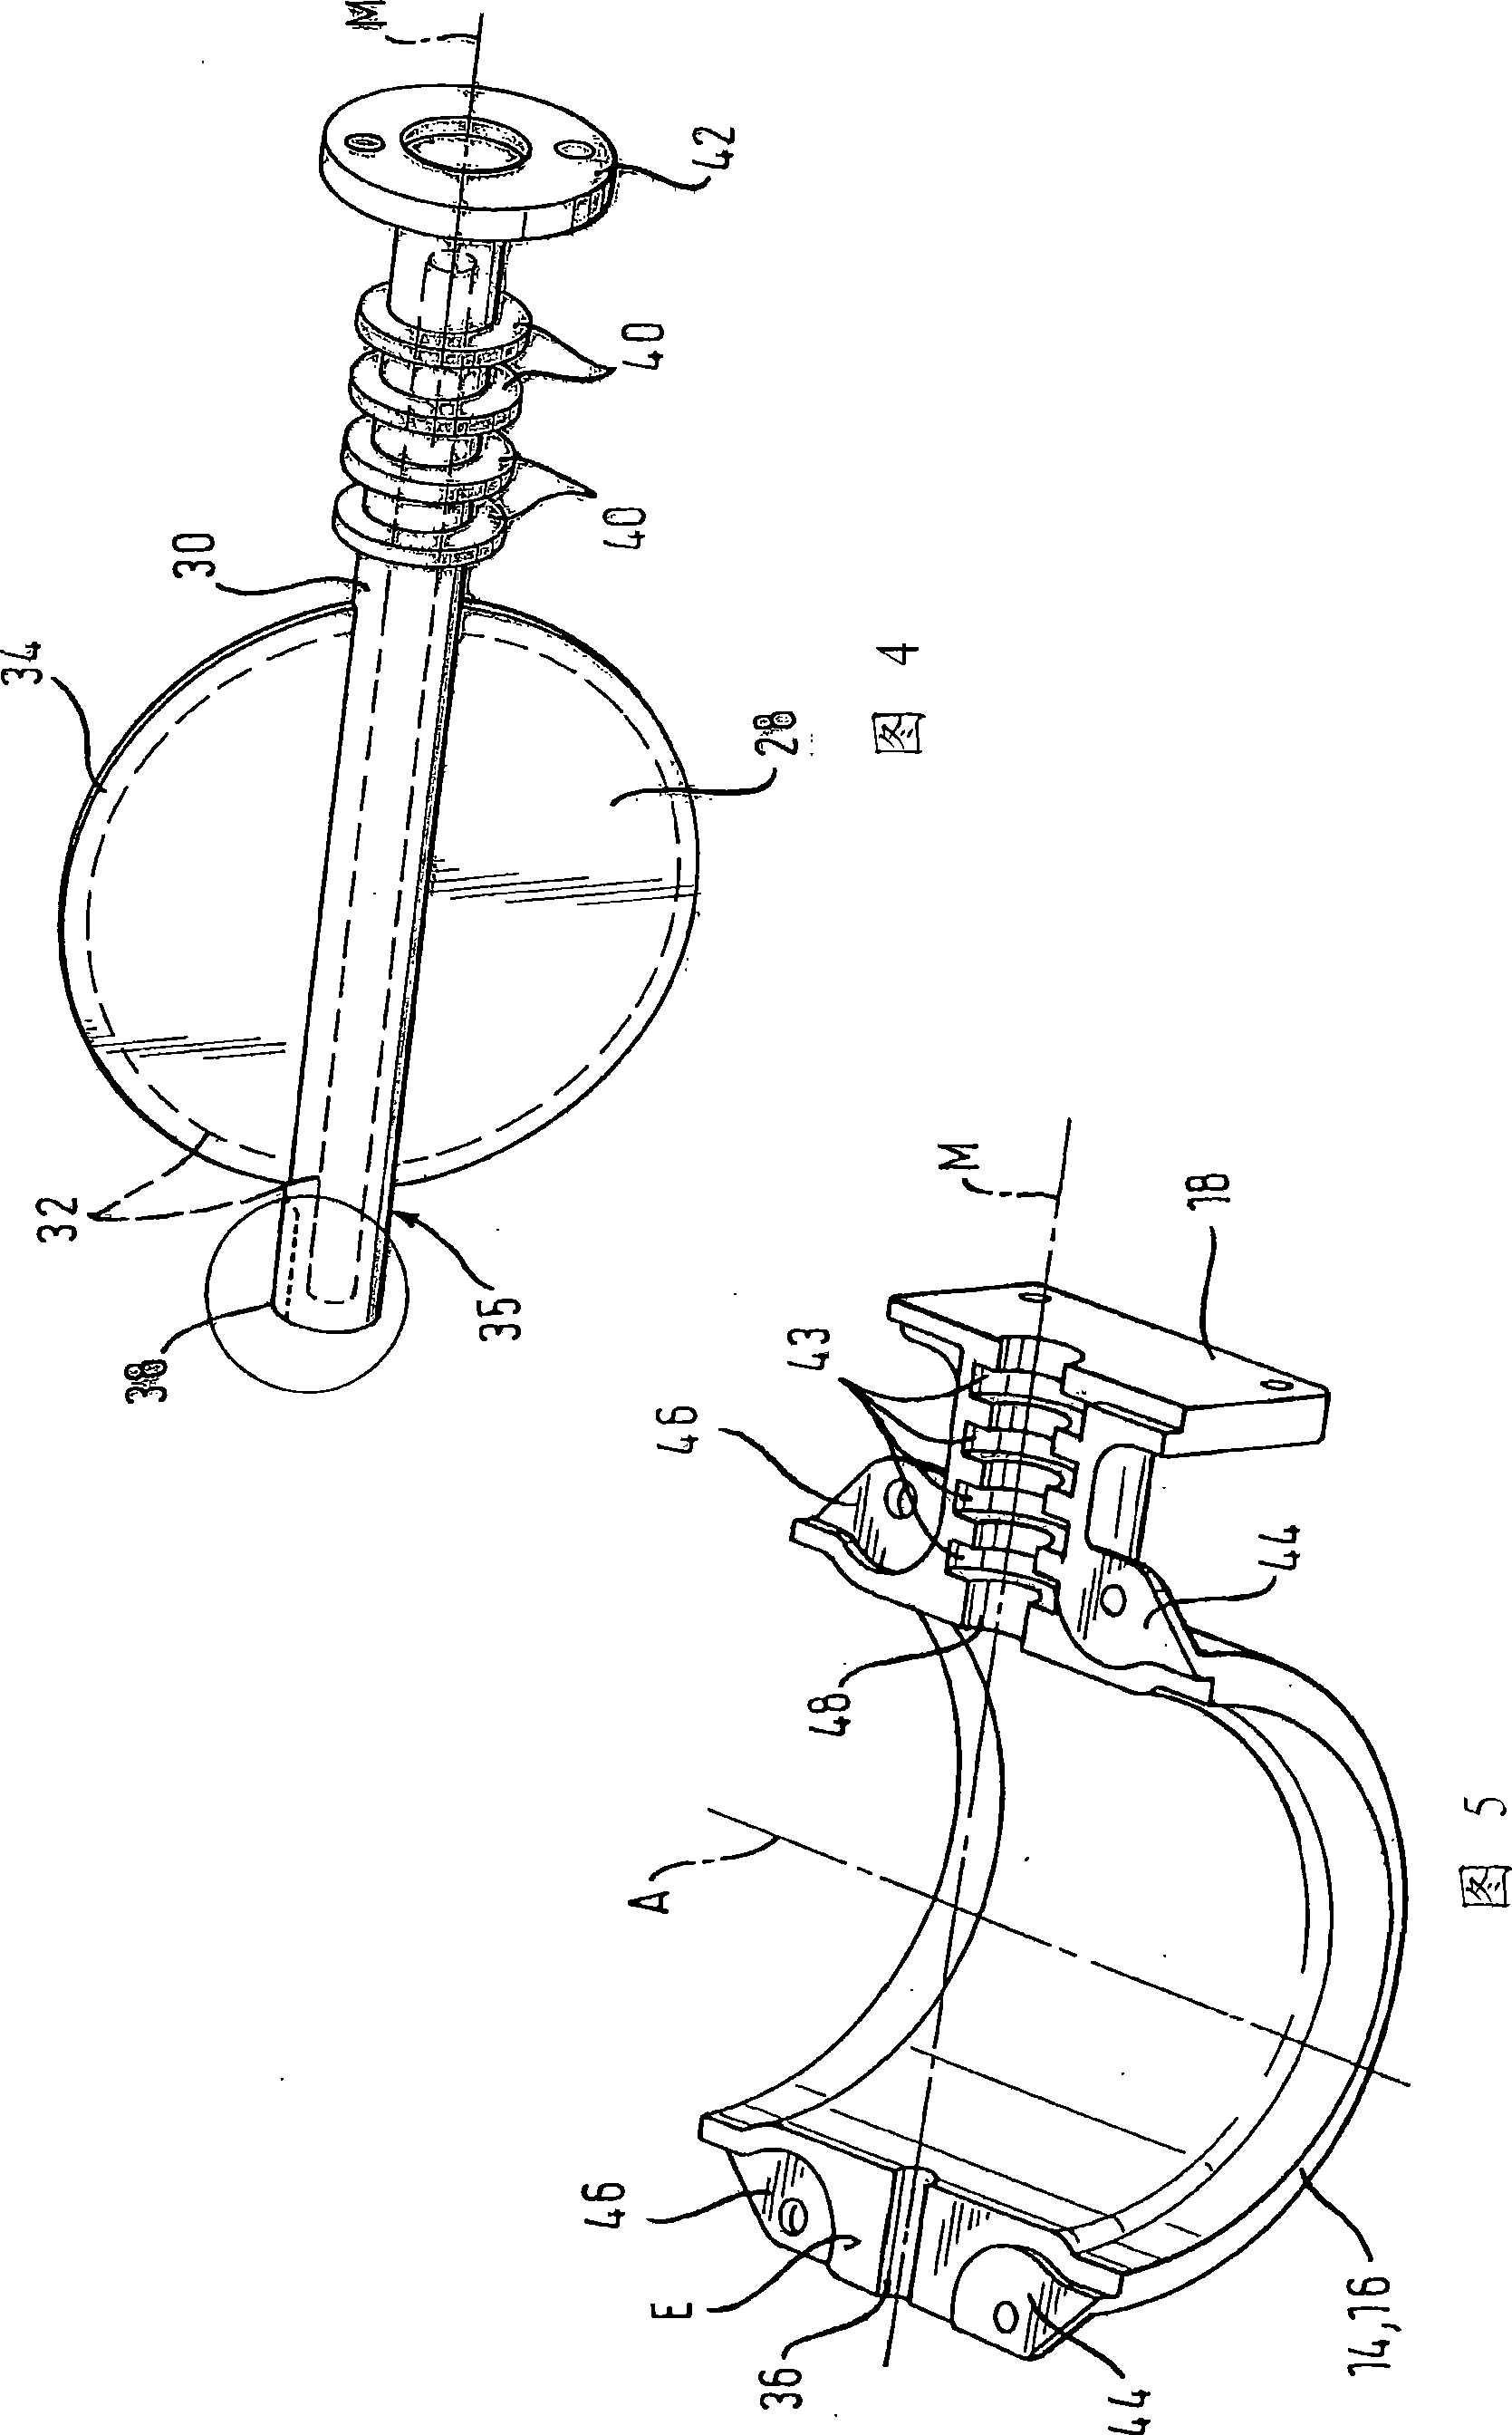 Device for influencing an exhaust gas flow